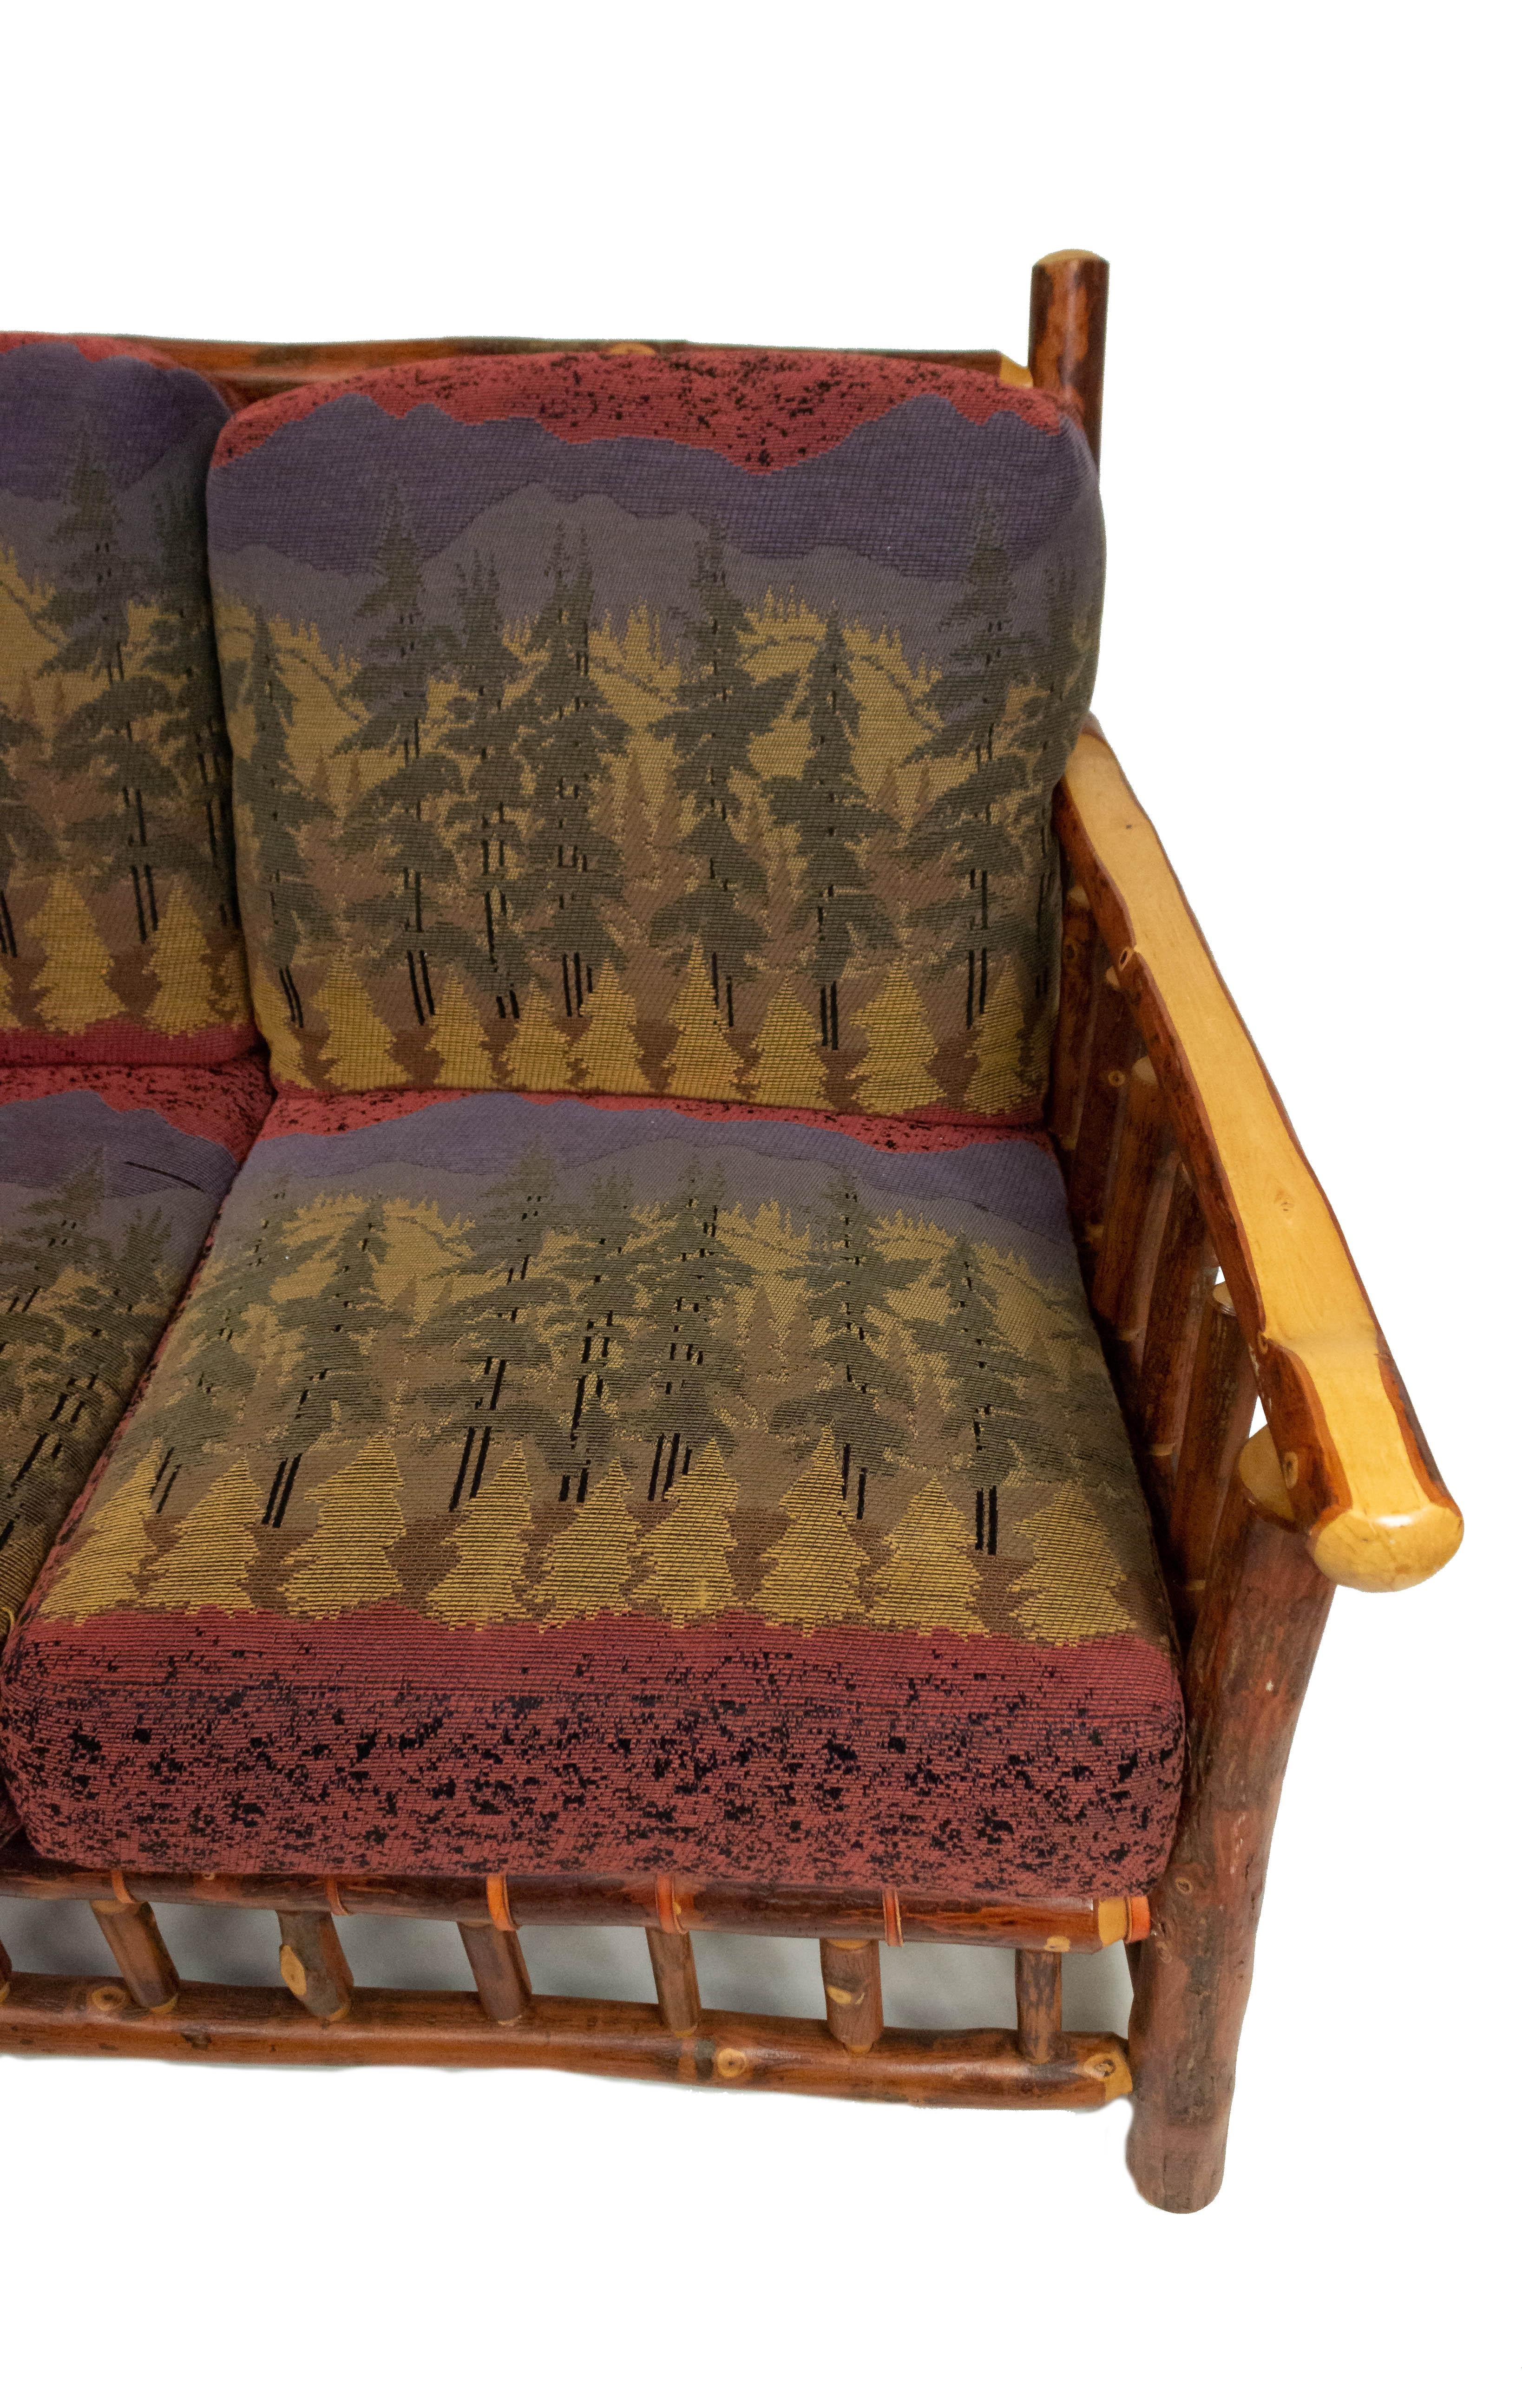 Upholstery Rustic Old Hickory Sofa with Forest Print For Sale